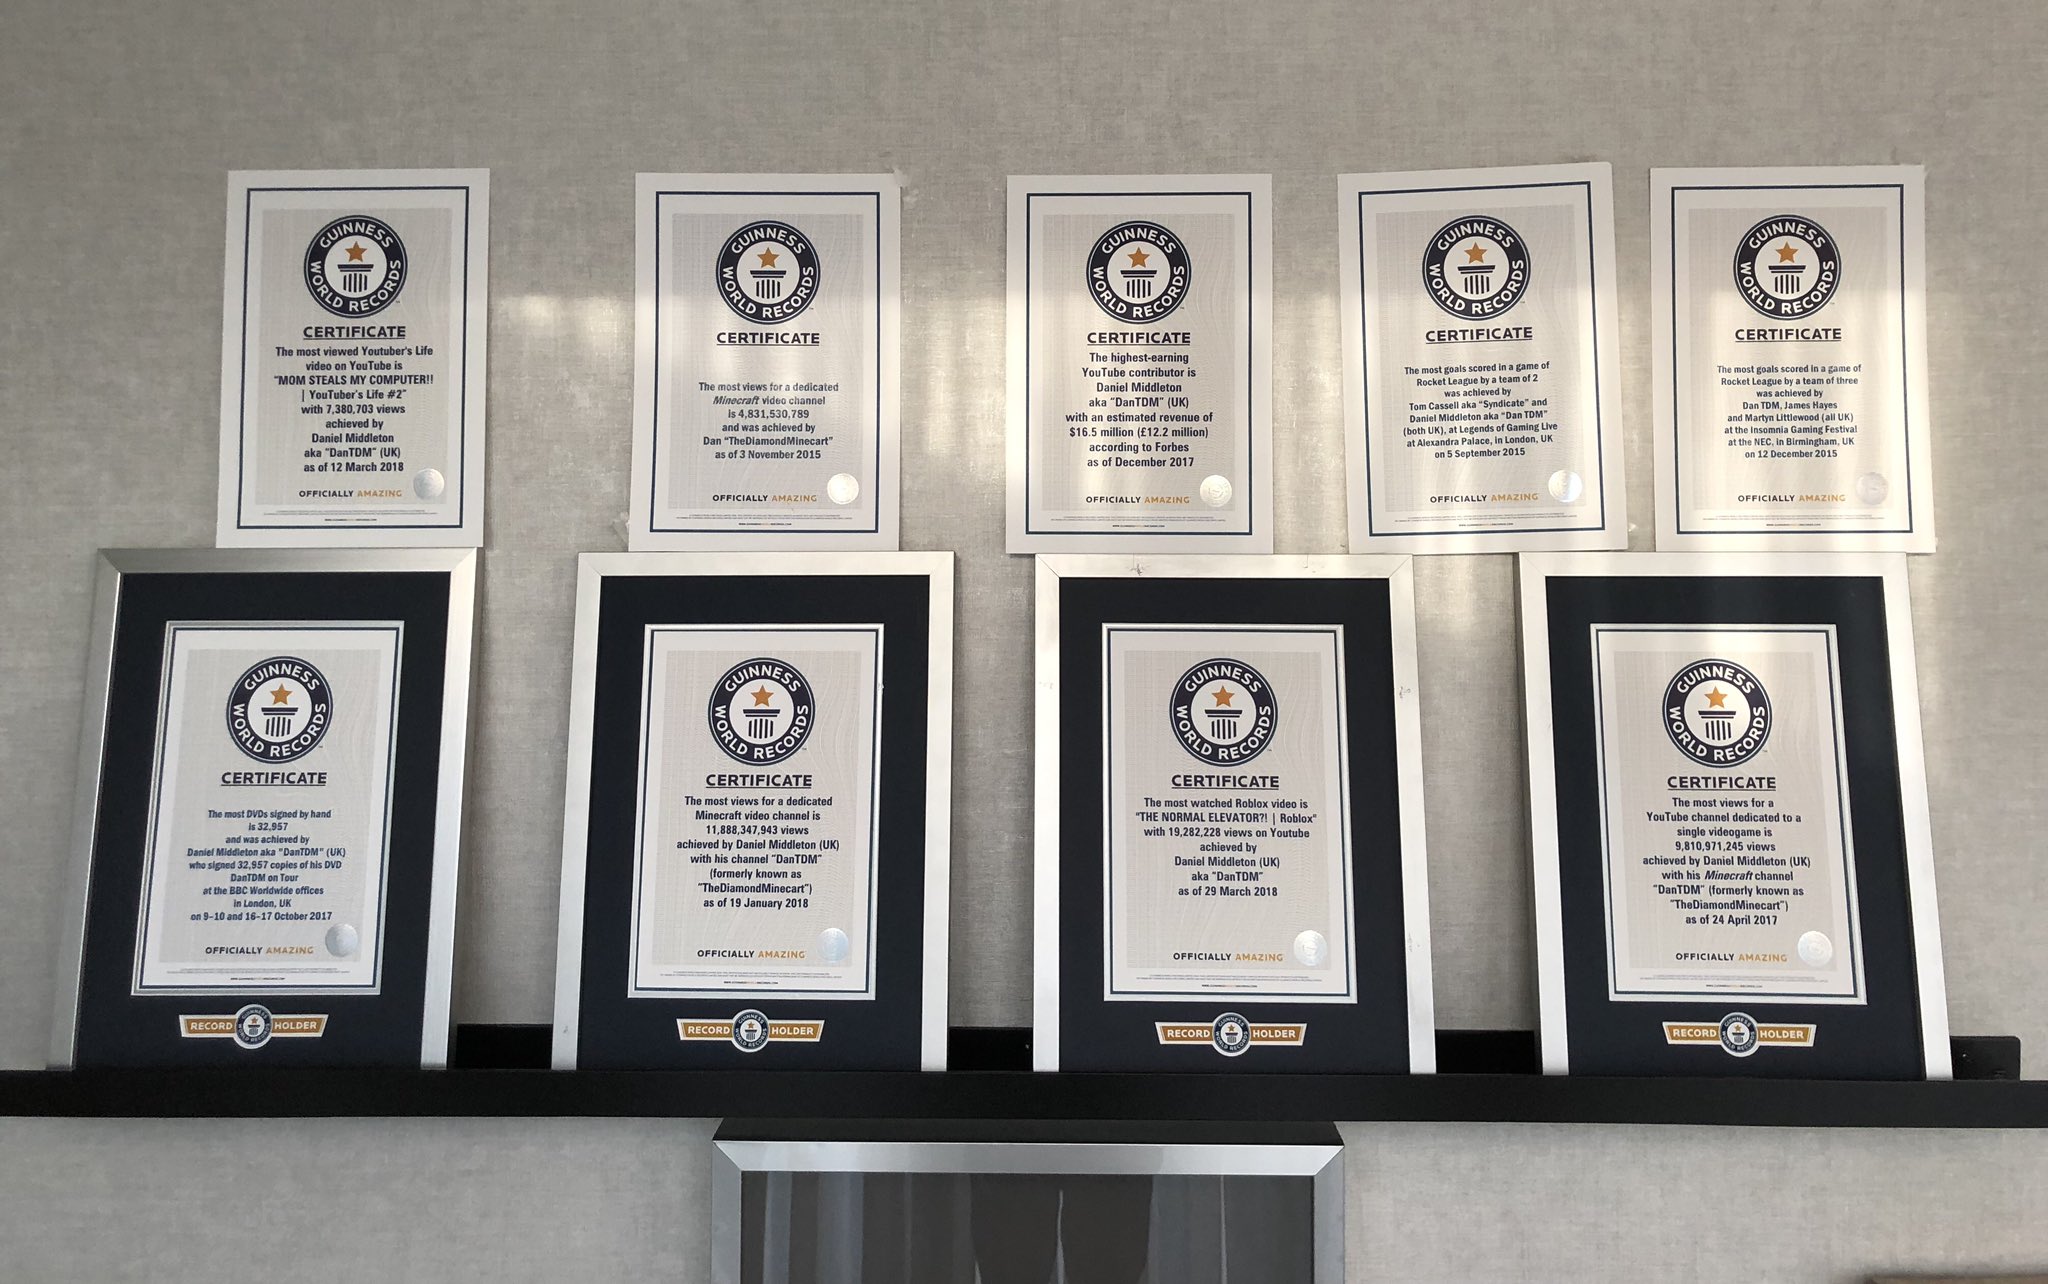 ᴅᴀɴᴛᴅᴍ On Twitter Here Comes A Weird Flex But Okay Got Delivery Of 5 New Guinness World Records Today I Now Have 9 That S Insane Https T Co Uogehmvtl7 - roblox accounts with passwords dantdm